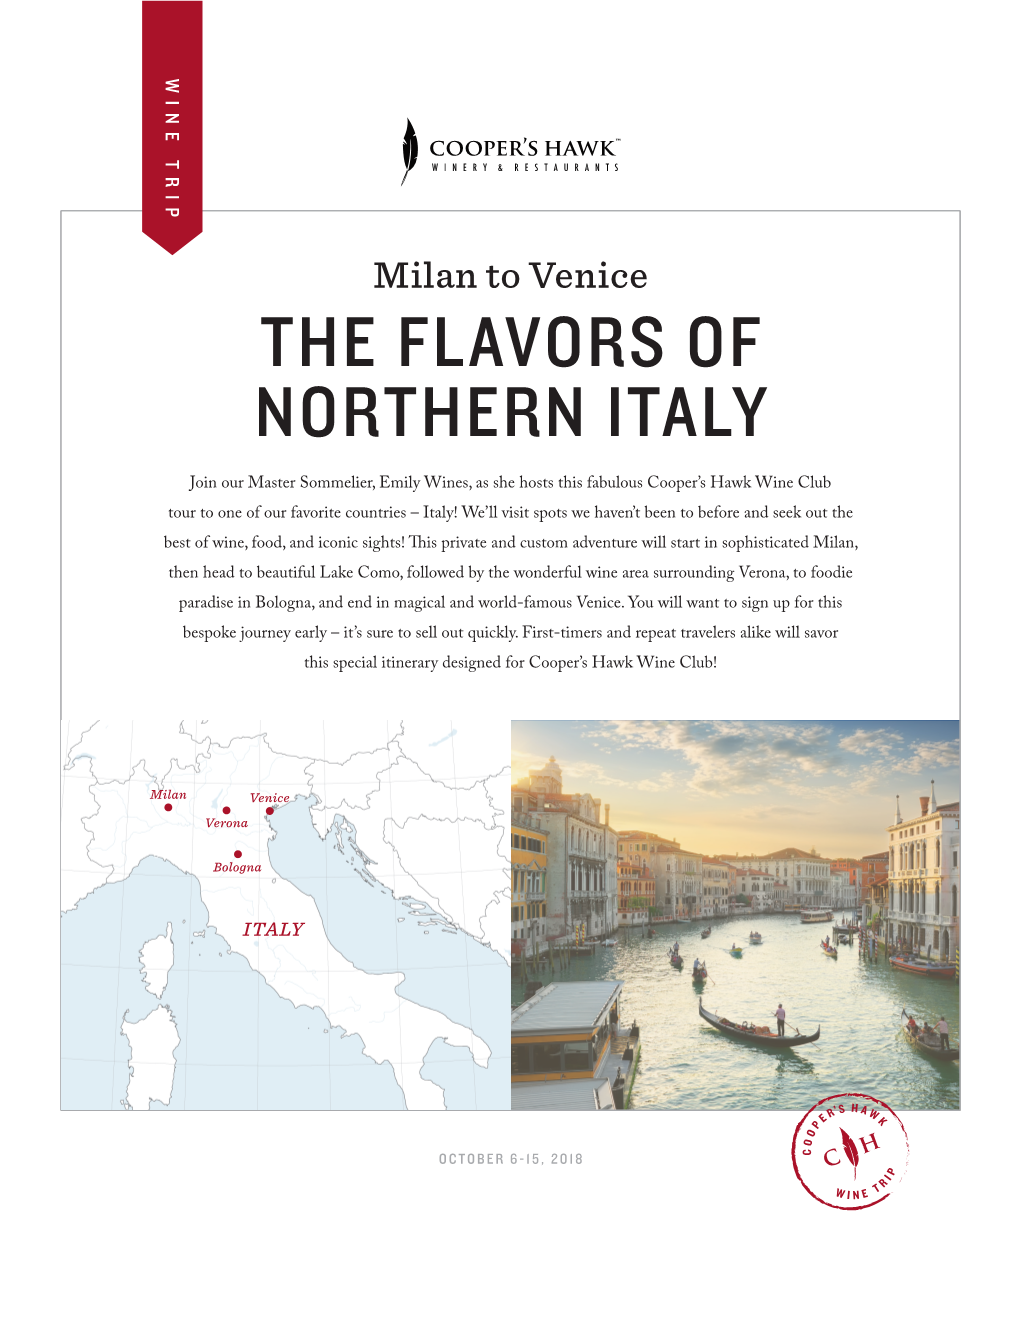 The Flavors of Northern Italy